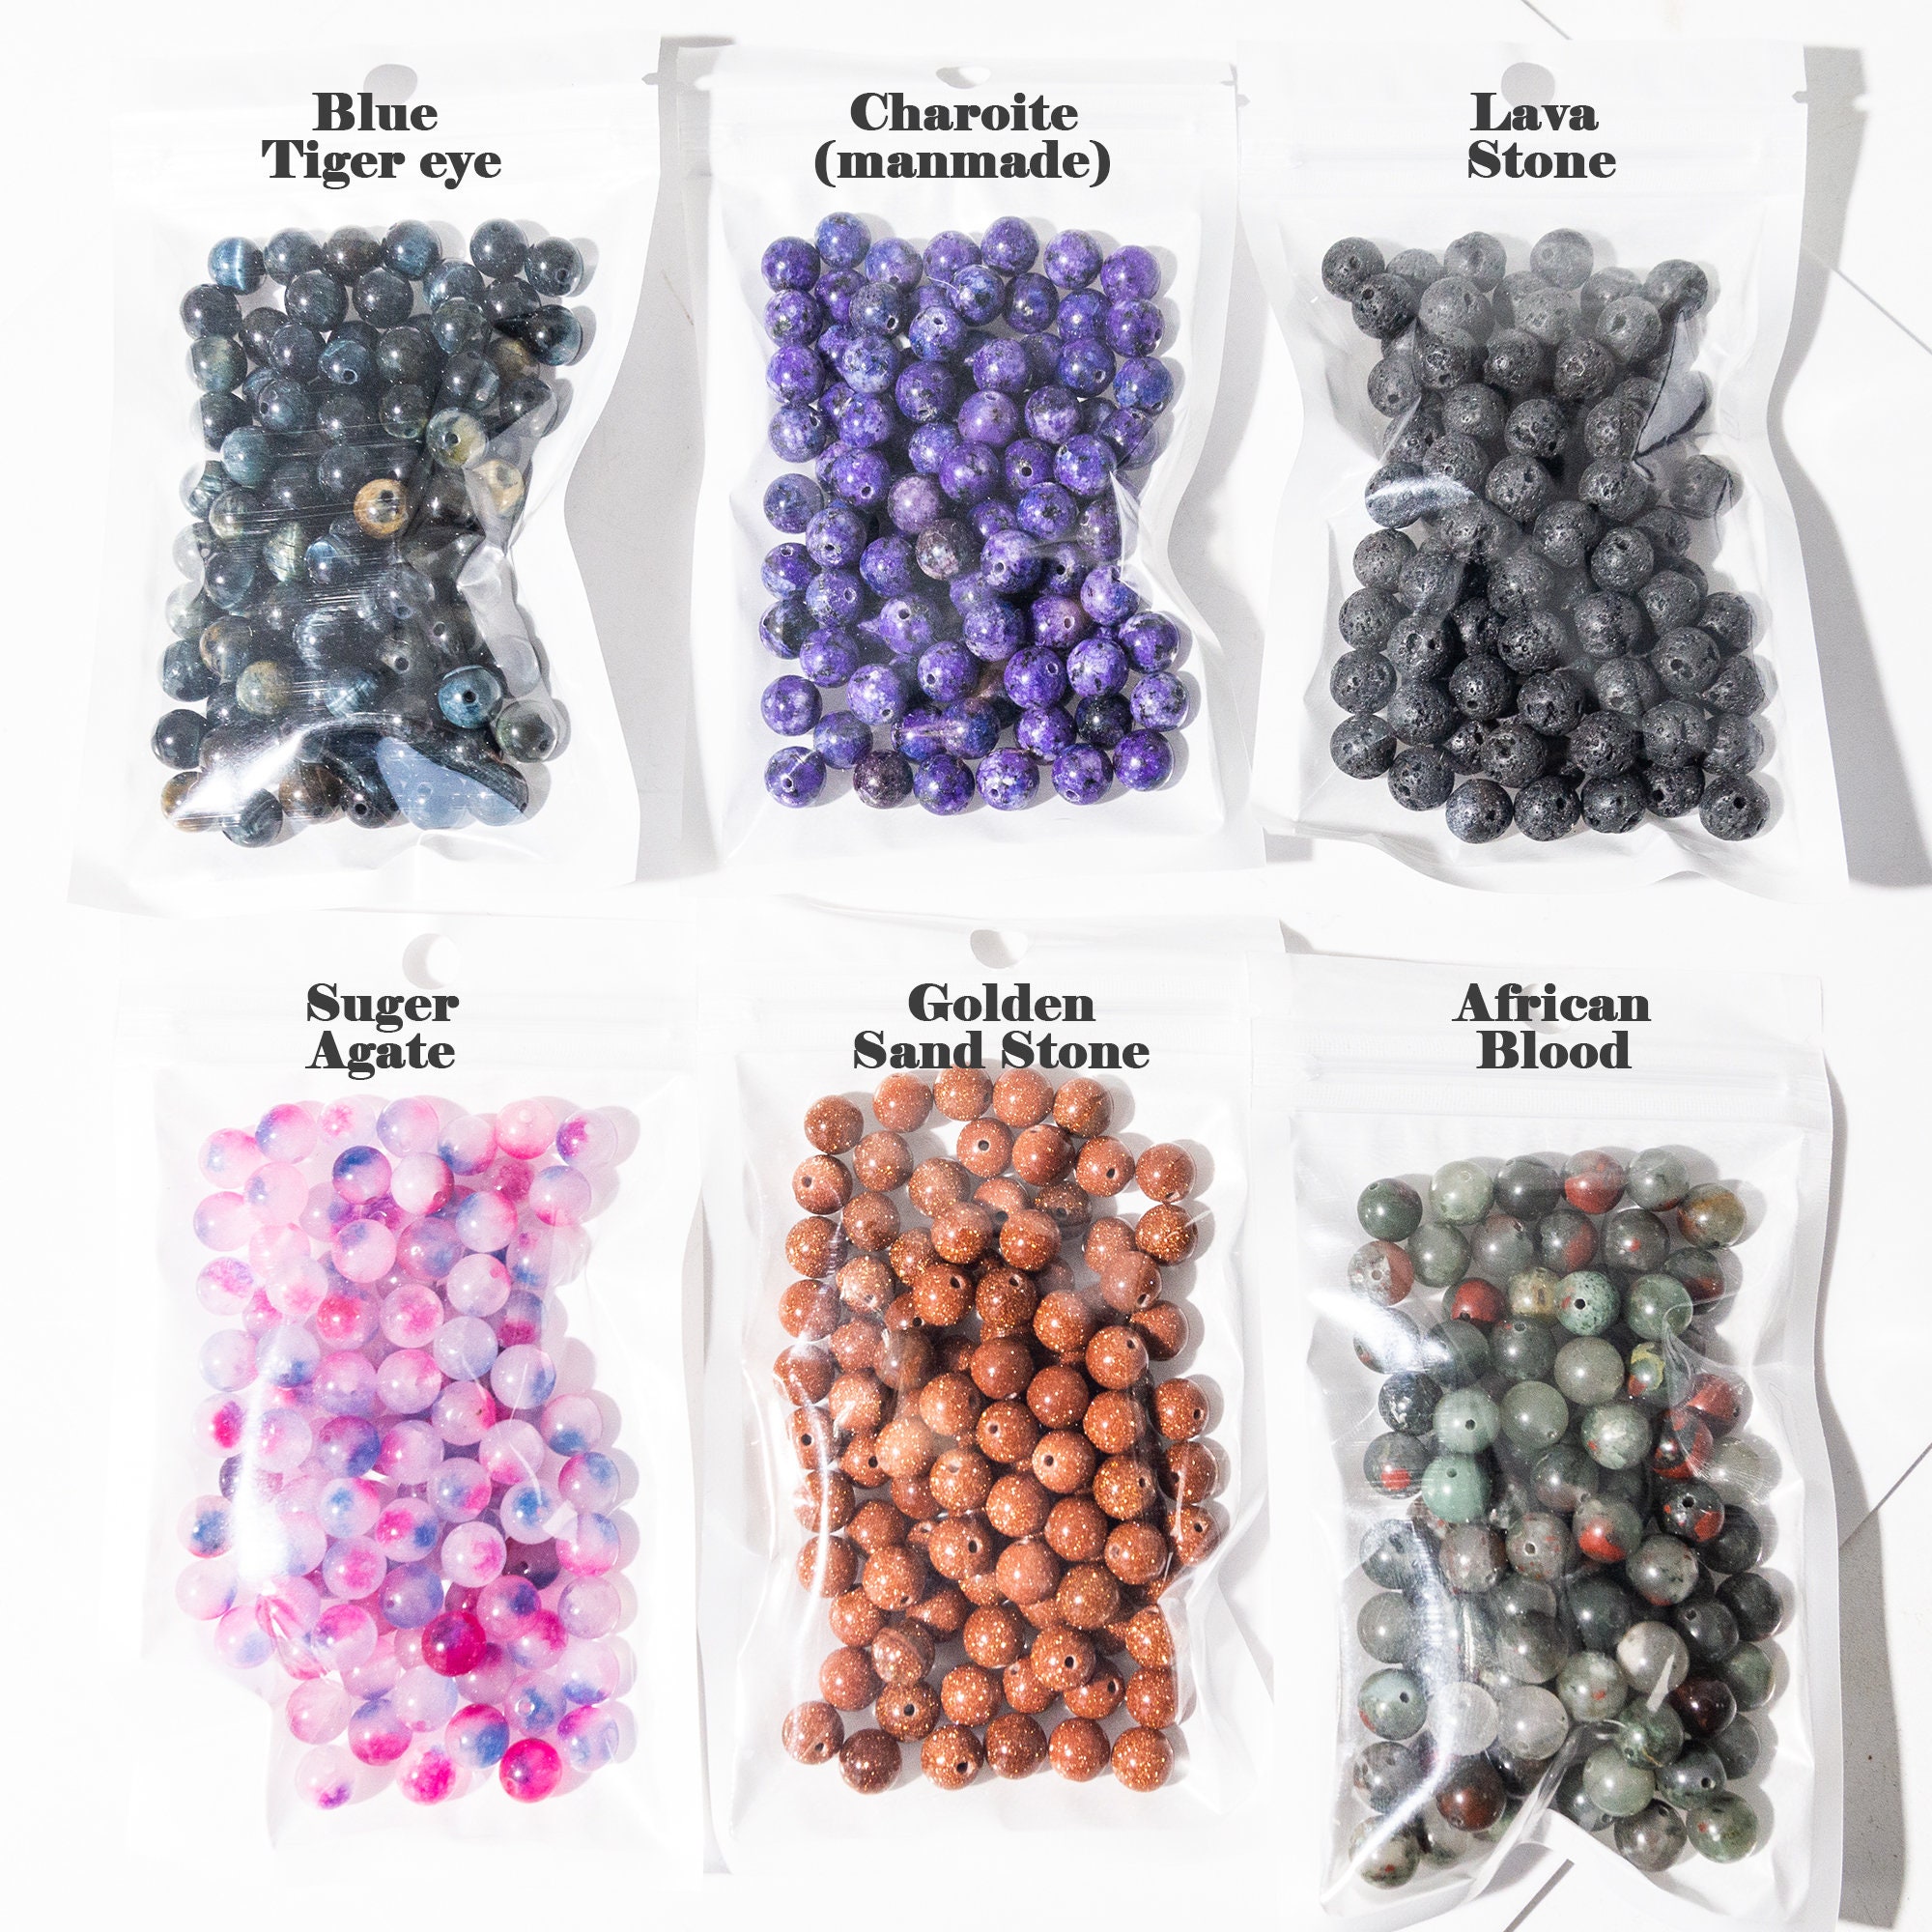 Bulk 1350 Beads Multi-color Crystal 4mm Rondelle Chinese Crystal Beads  Spacer Beads Glass Beads, Wholesale Price. Great for JEWELRY Making 